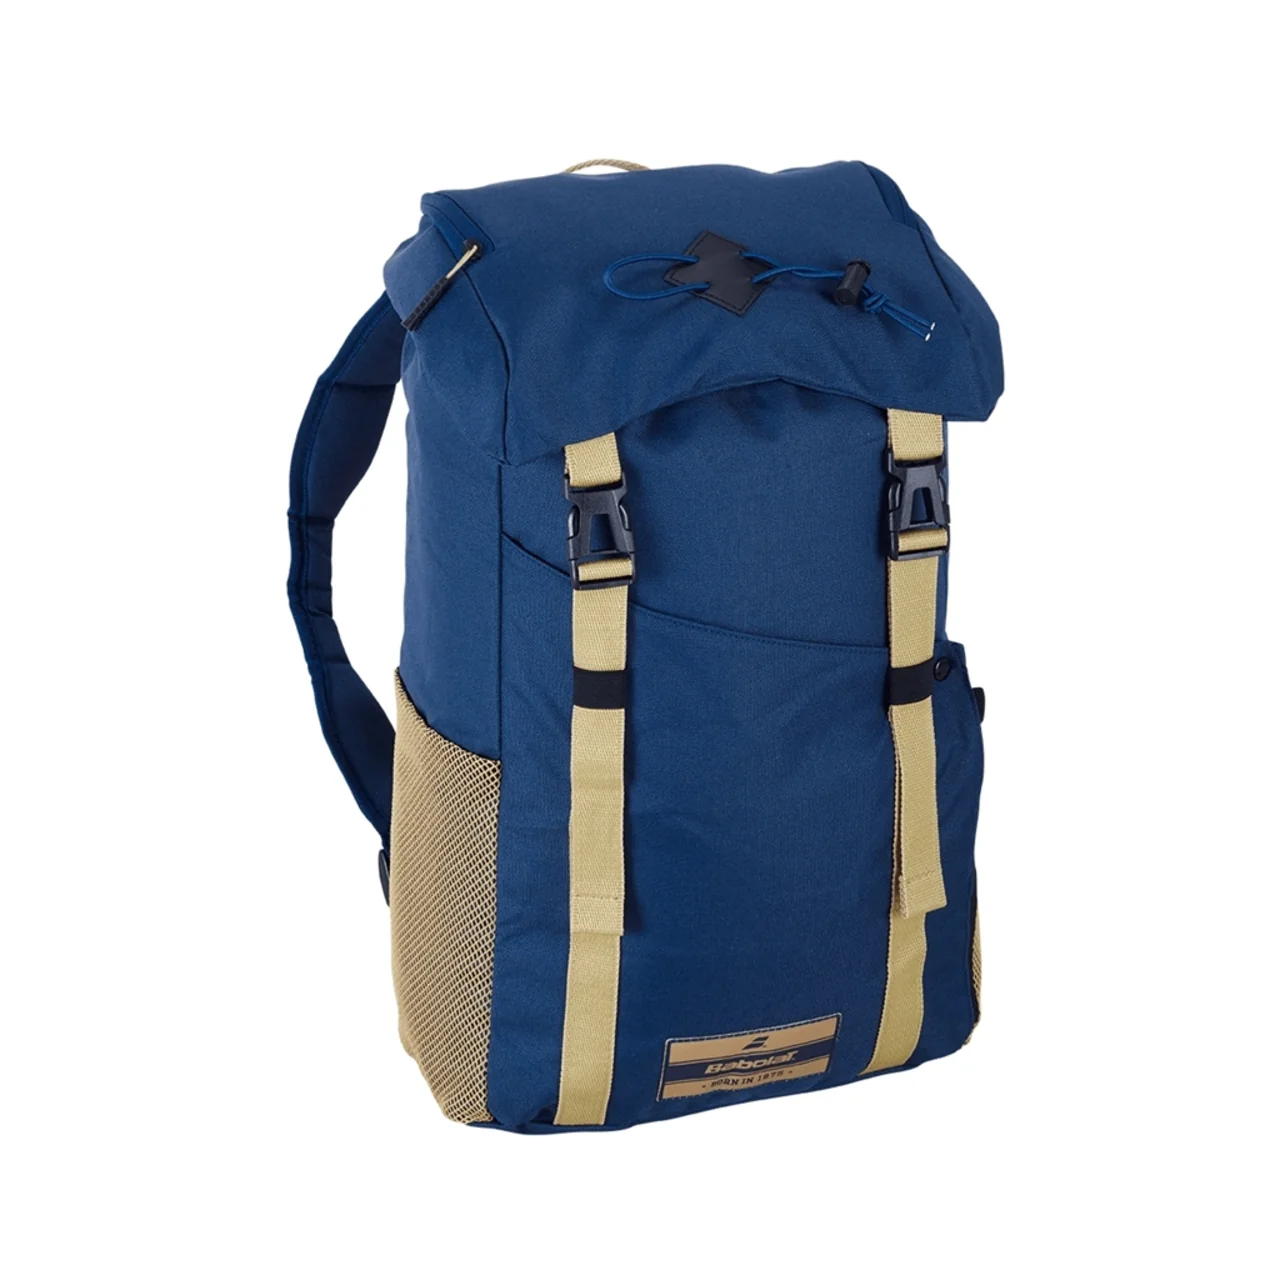 Babolat Backpack Classic Pack Blue